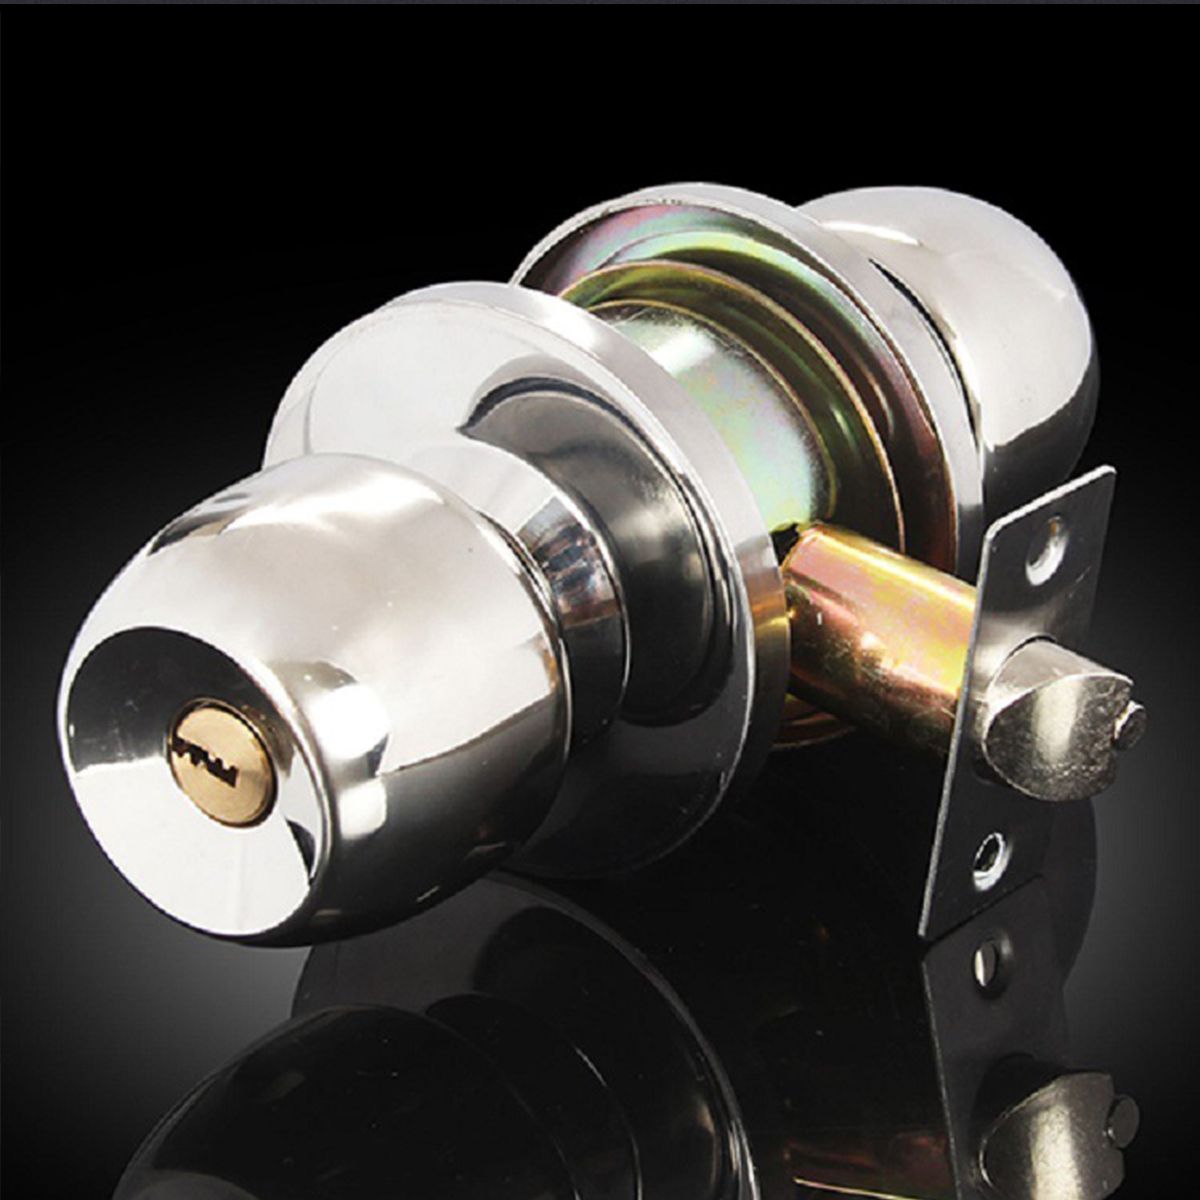 Stainless-Steel-Round-Door-Knobs-Privacy-Passage-Entrance-Lock-Entry-with-3-Keys-1680554